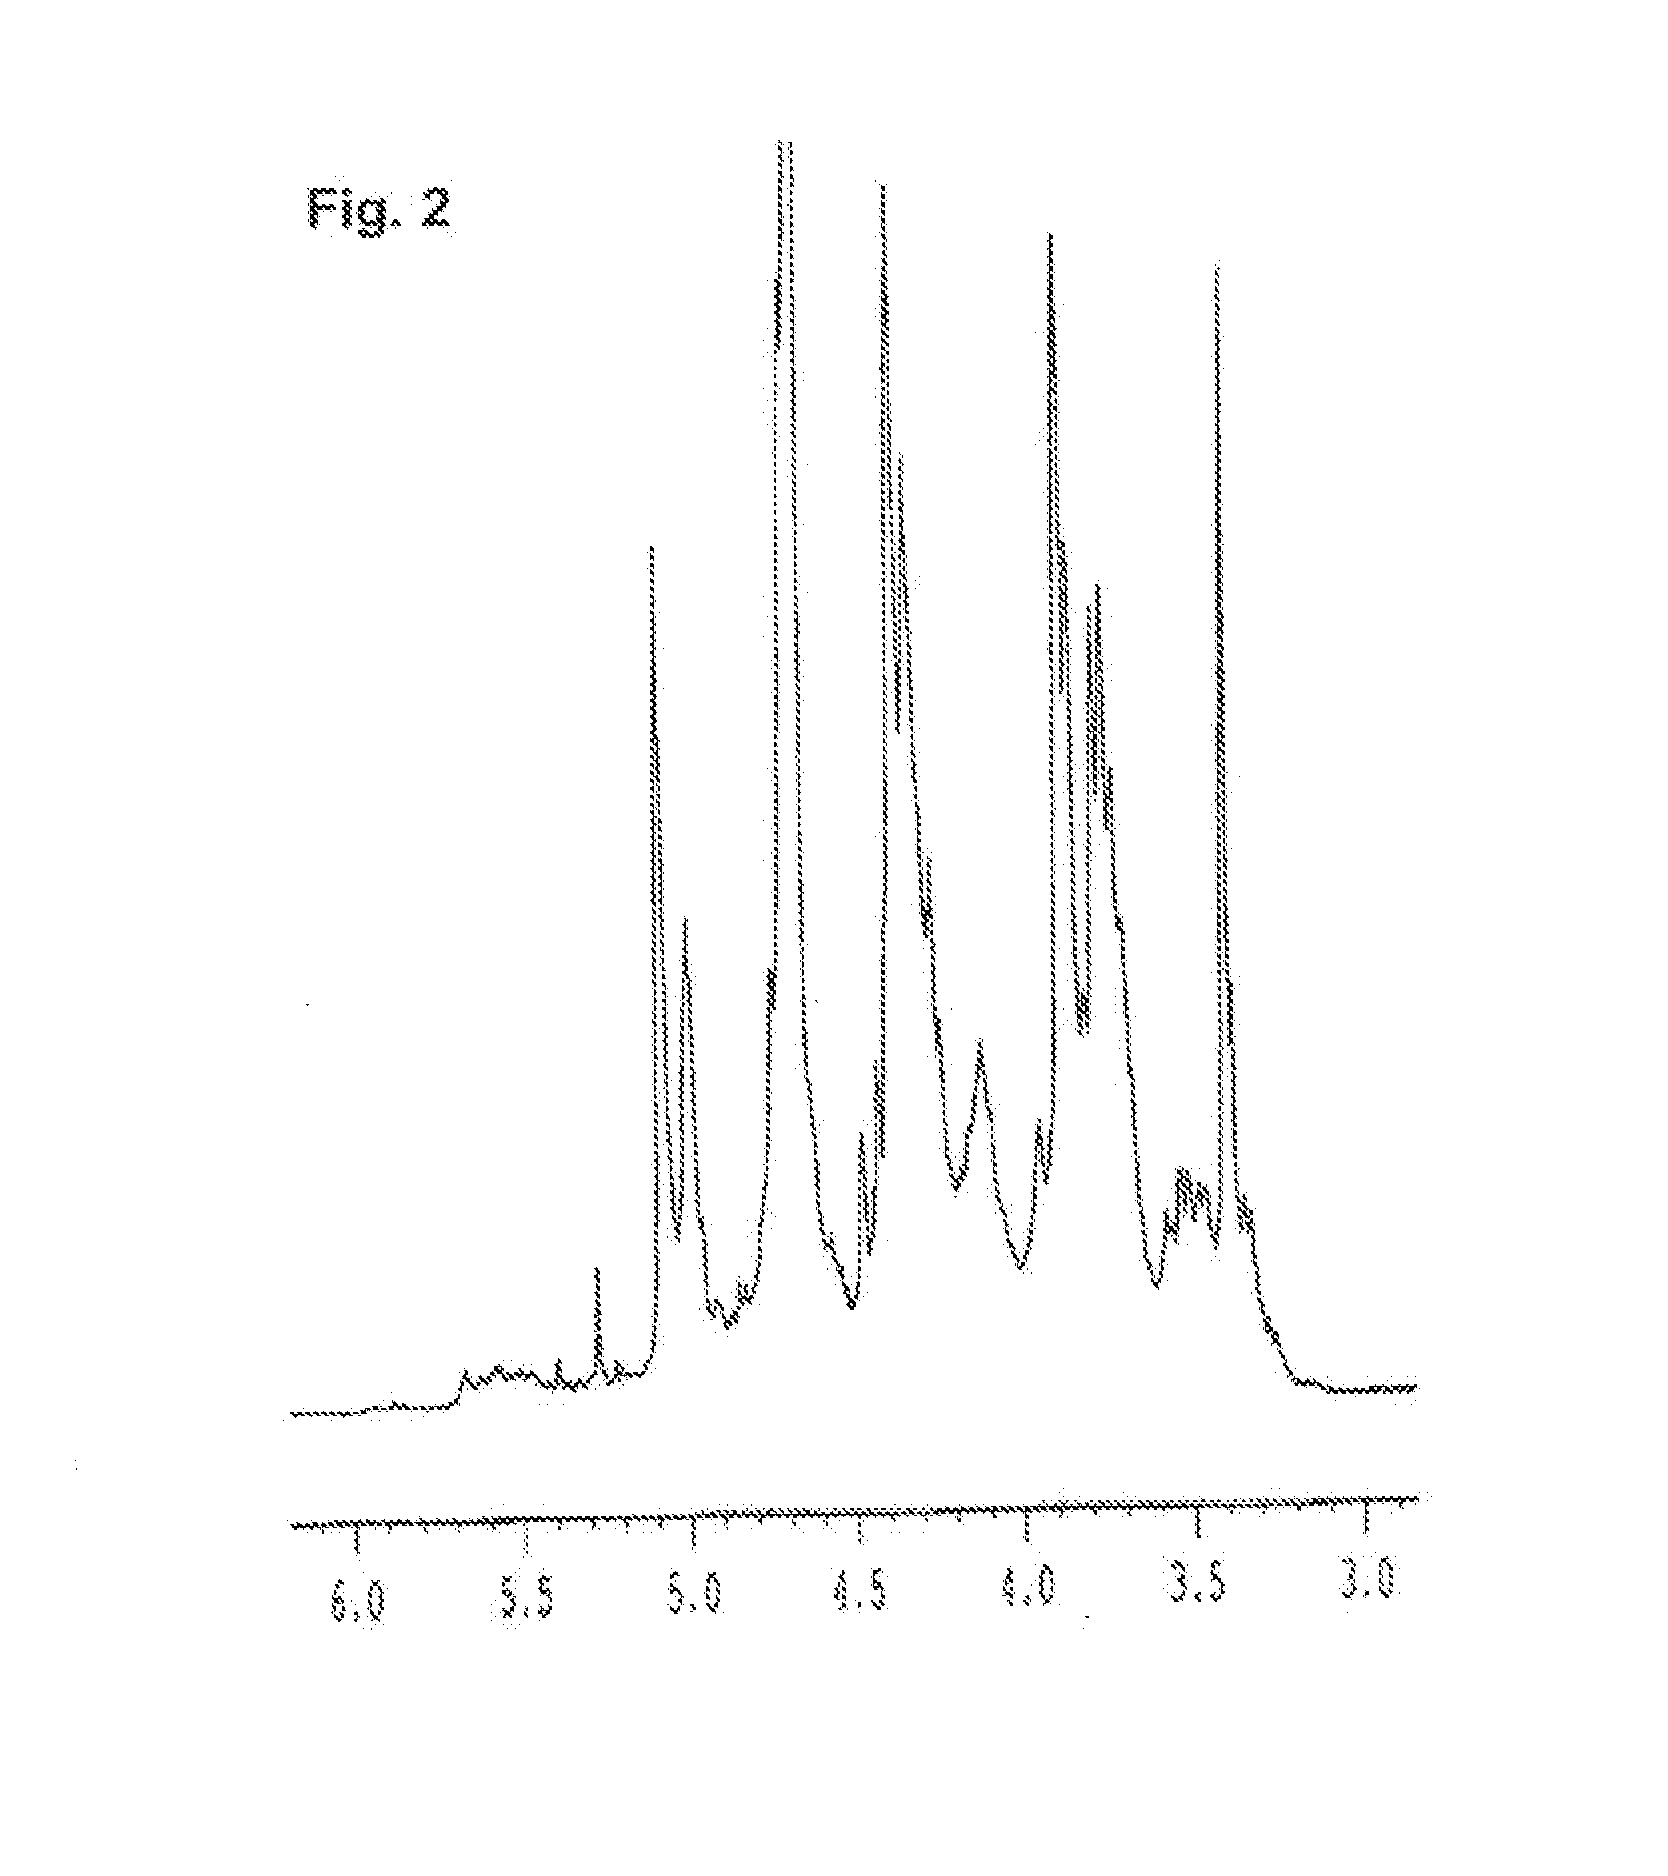 Sulfated polysaccharide compound and the preparation and use thereof